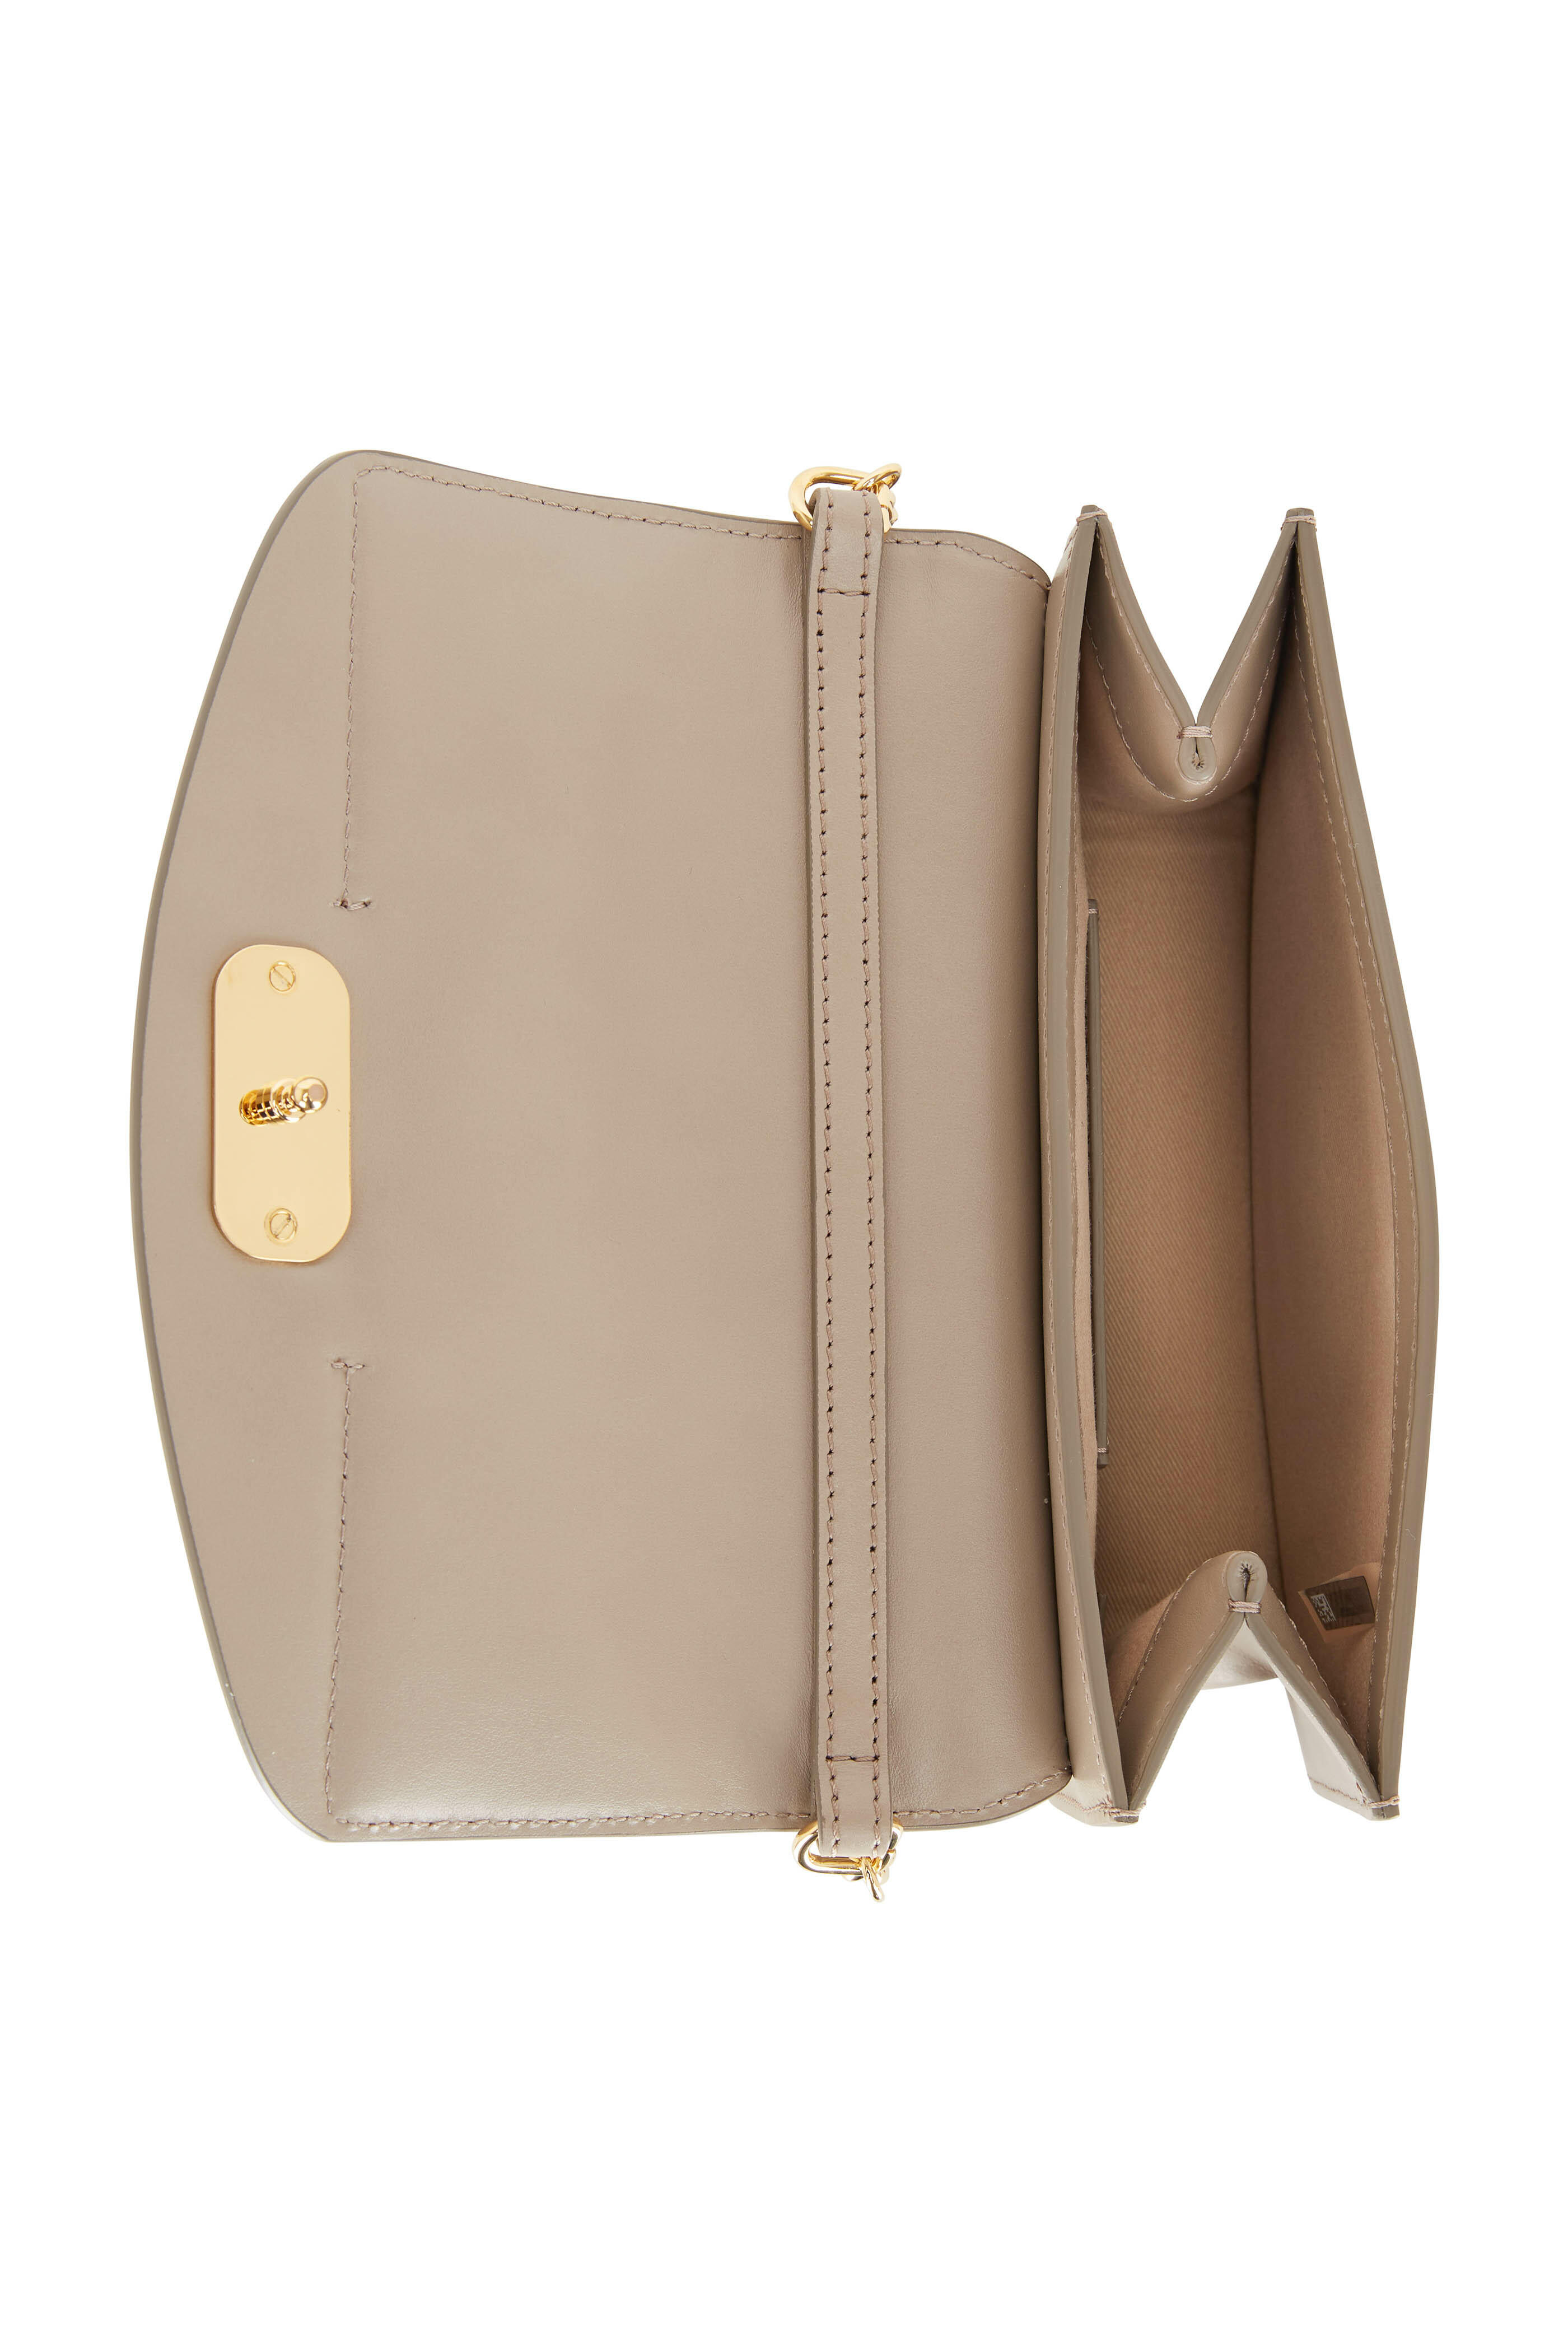 Chloé Small C Suede Trimmed Motty Grey Leather Shoulder Bag - MyDesignerly